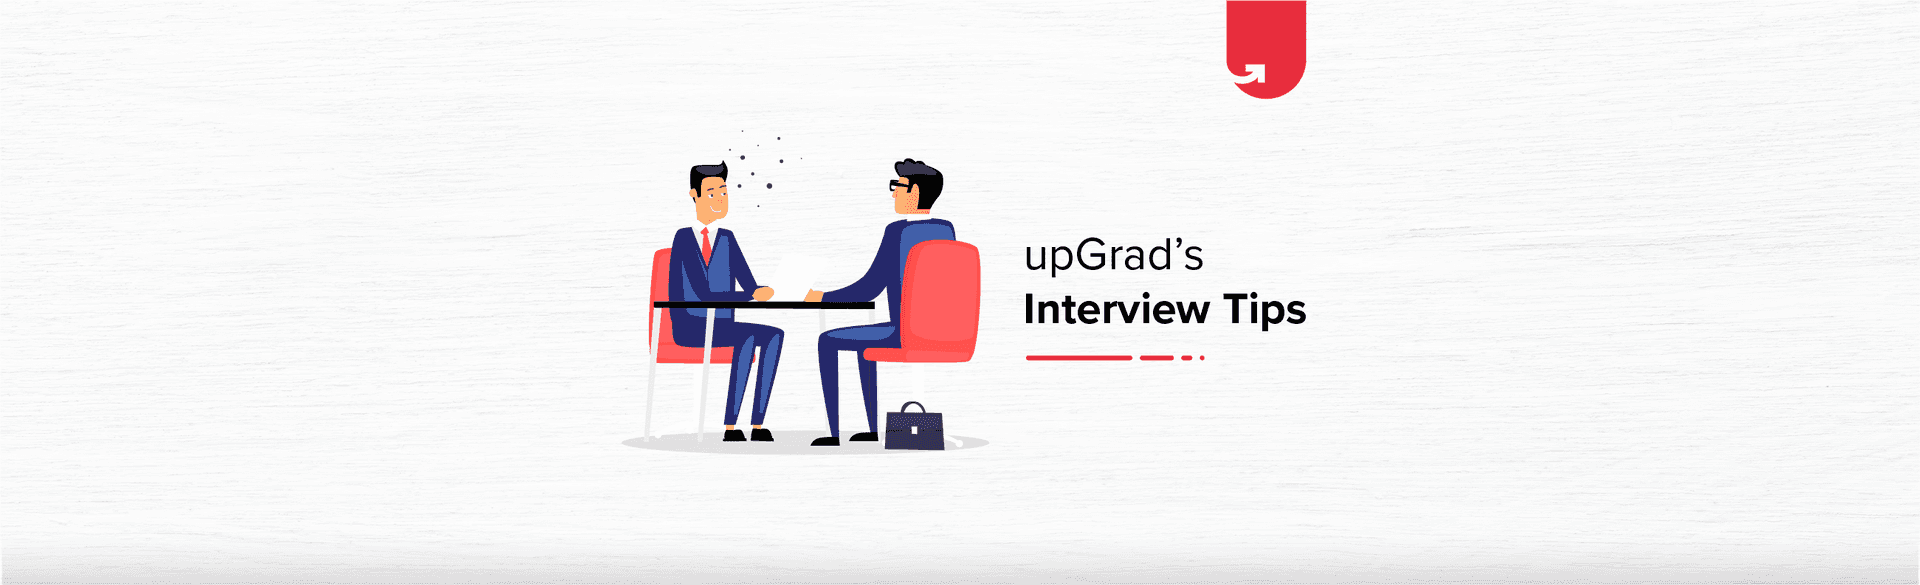 When &#038; How to Follow up After an Interview? 4 Key Points To Keep in Mind